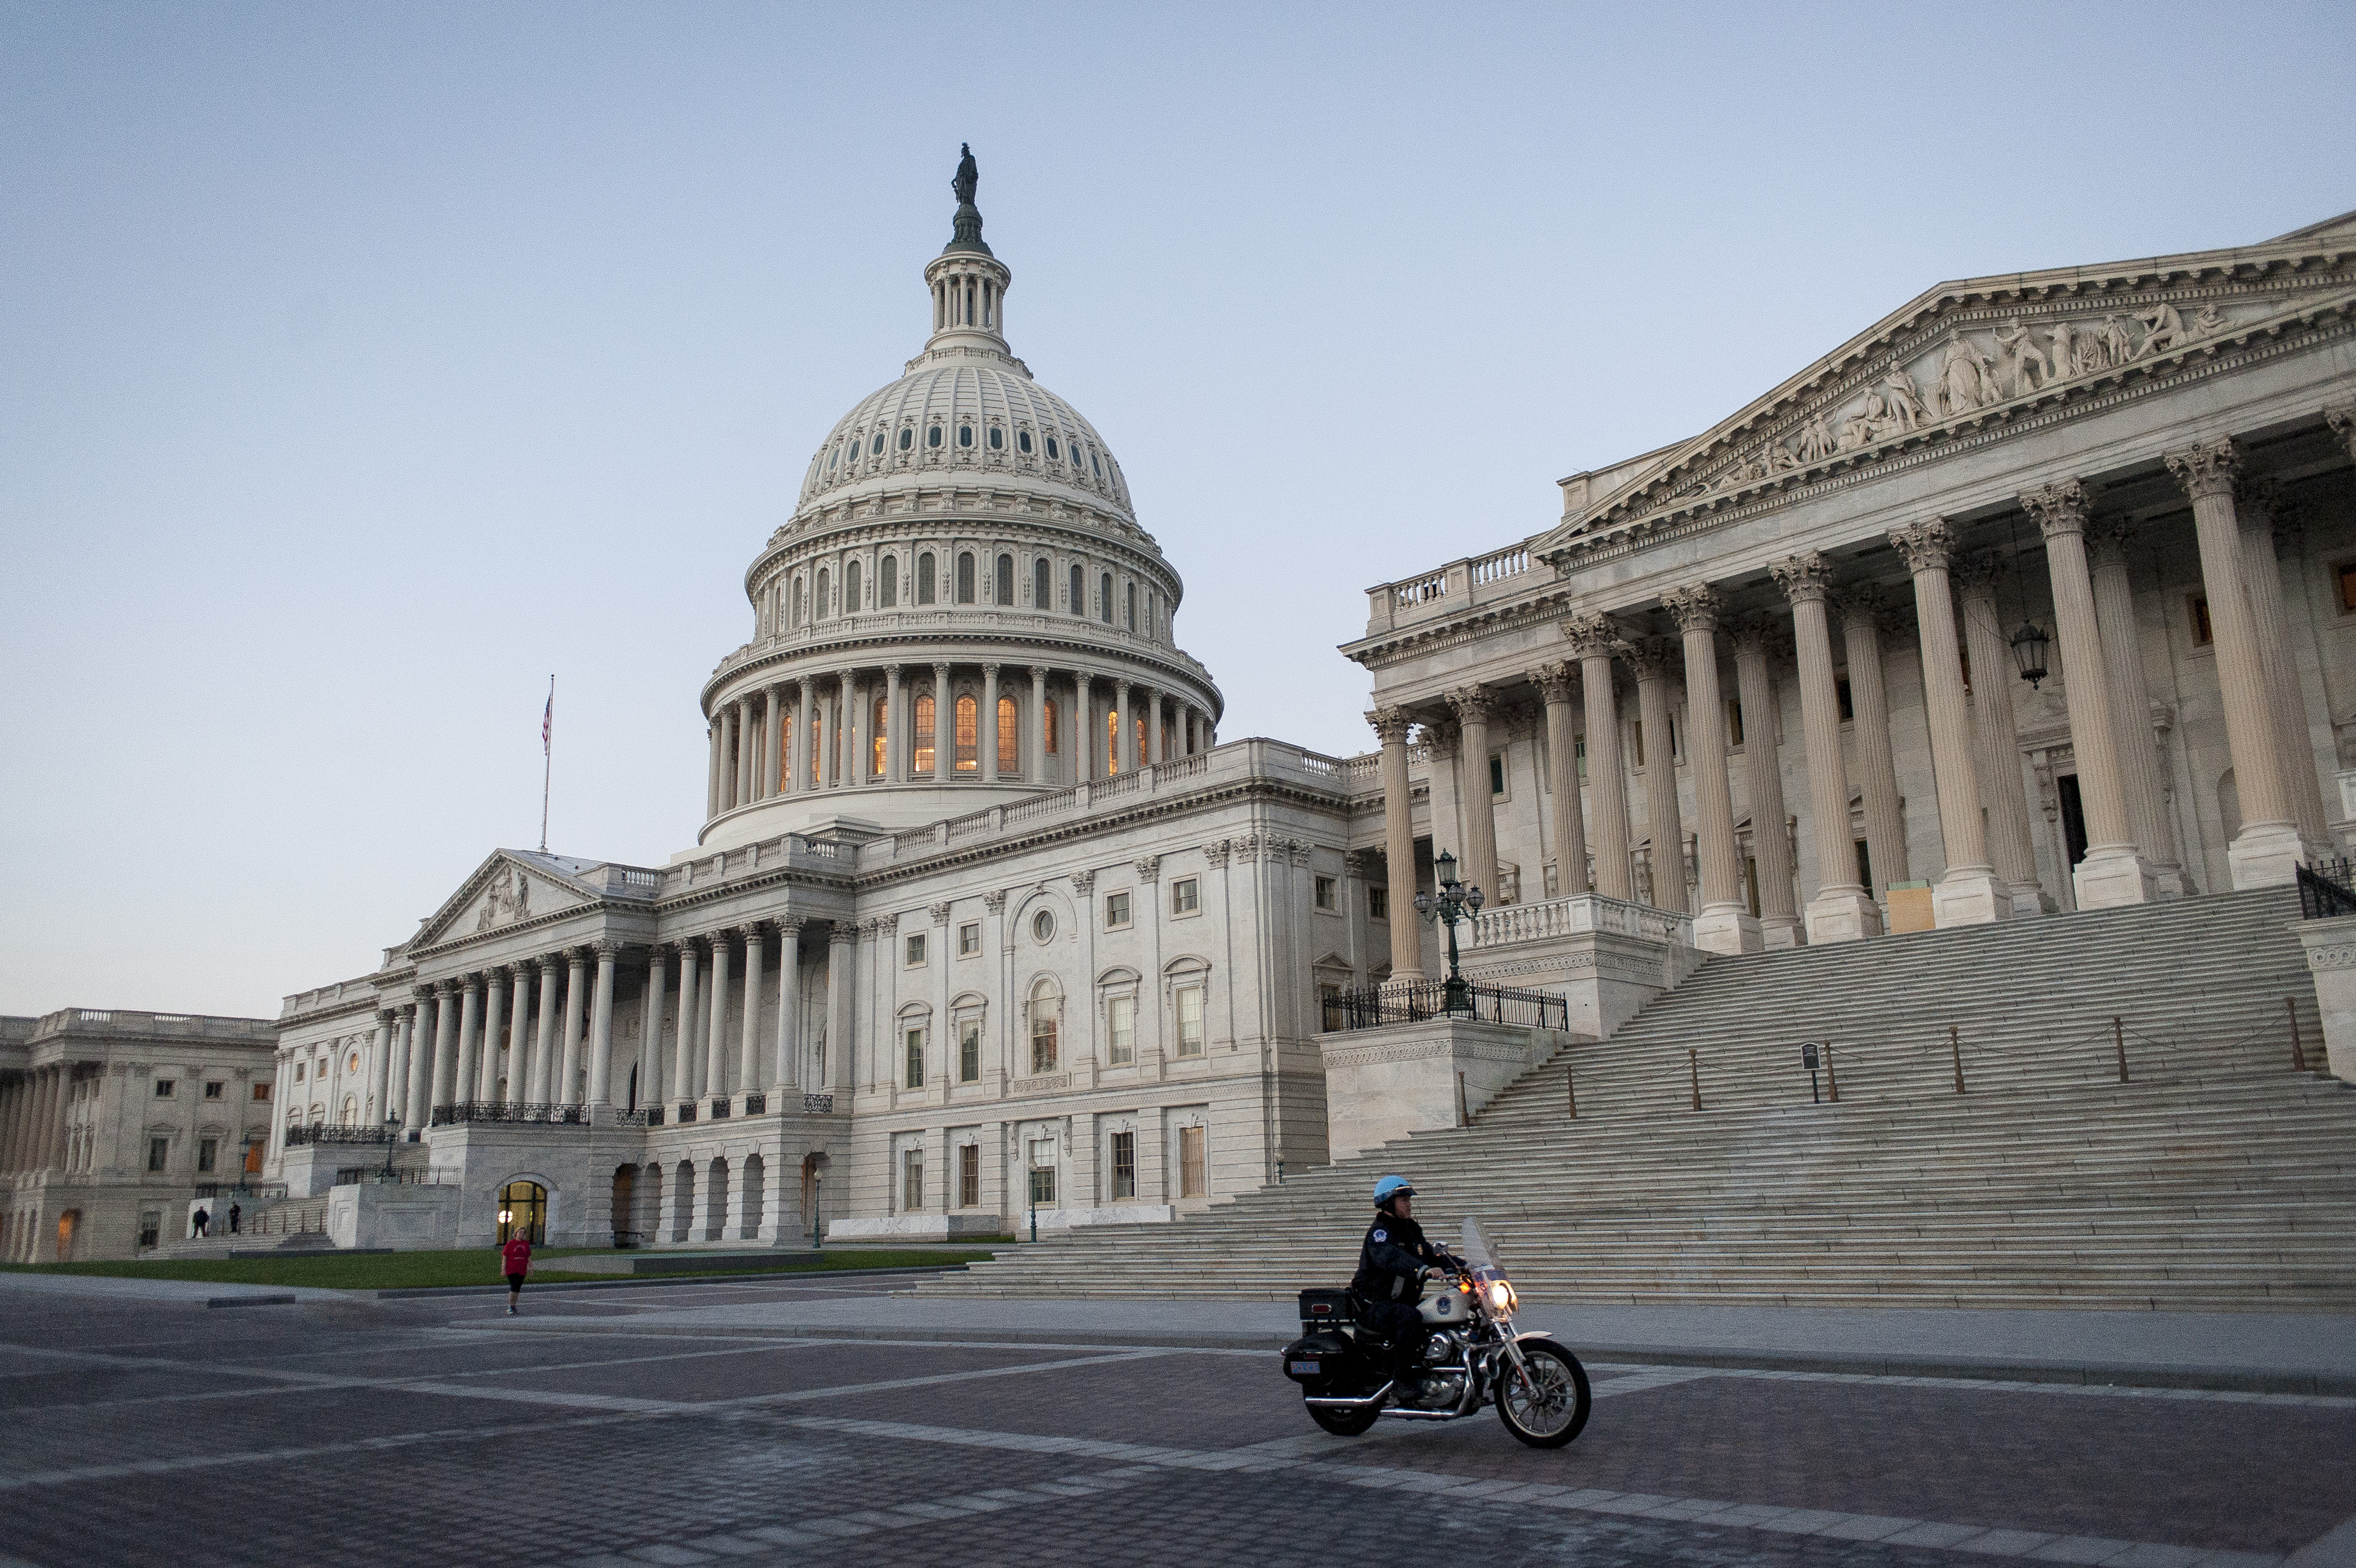 A police officer rides a motorcycle past the United States Capitol building at sunrise in Washington, D.C., U.S., on Tuesday, Oct. 15, 2013. (Pete Marovich—Bloomberg/Getty Images)